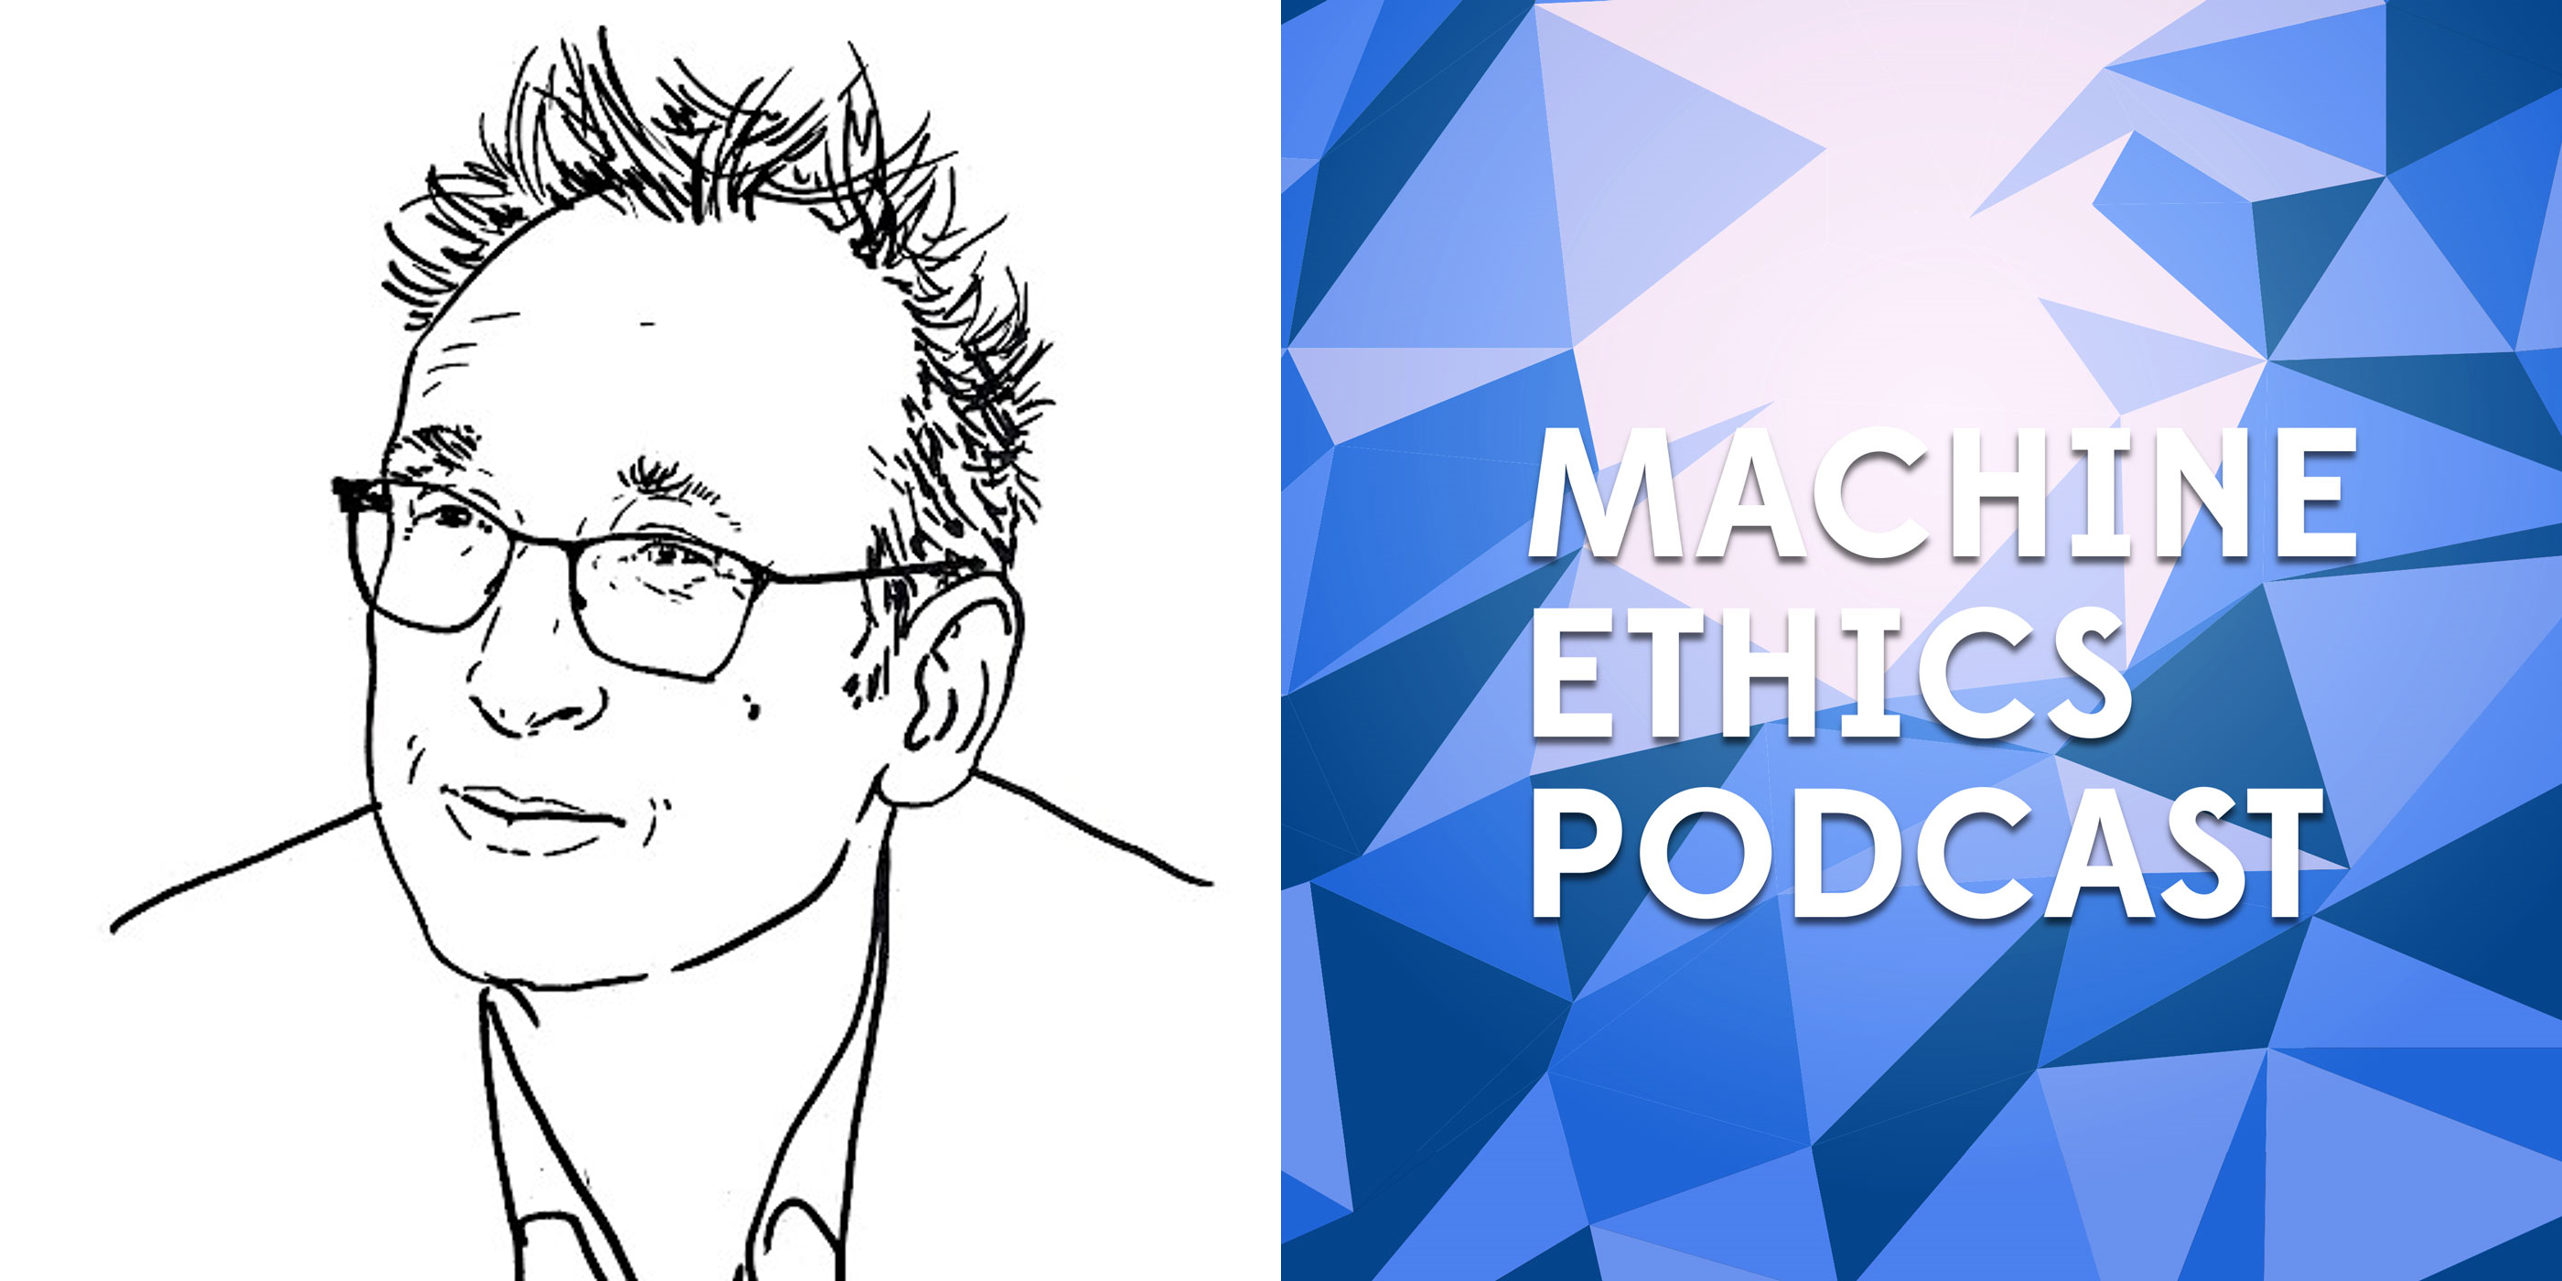 Left: Marc Steen in linedrawing form. Right: Machine Ethics Pod logo - white text on blue background